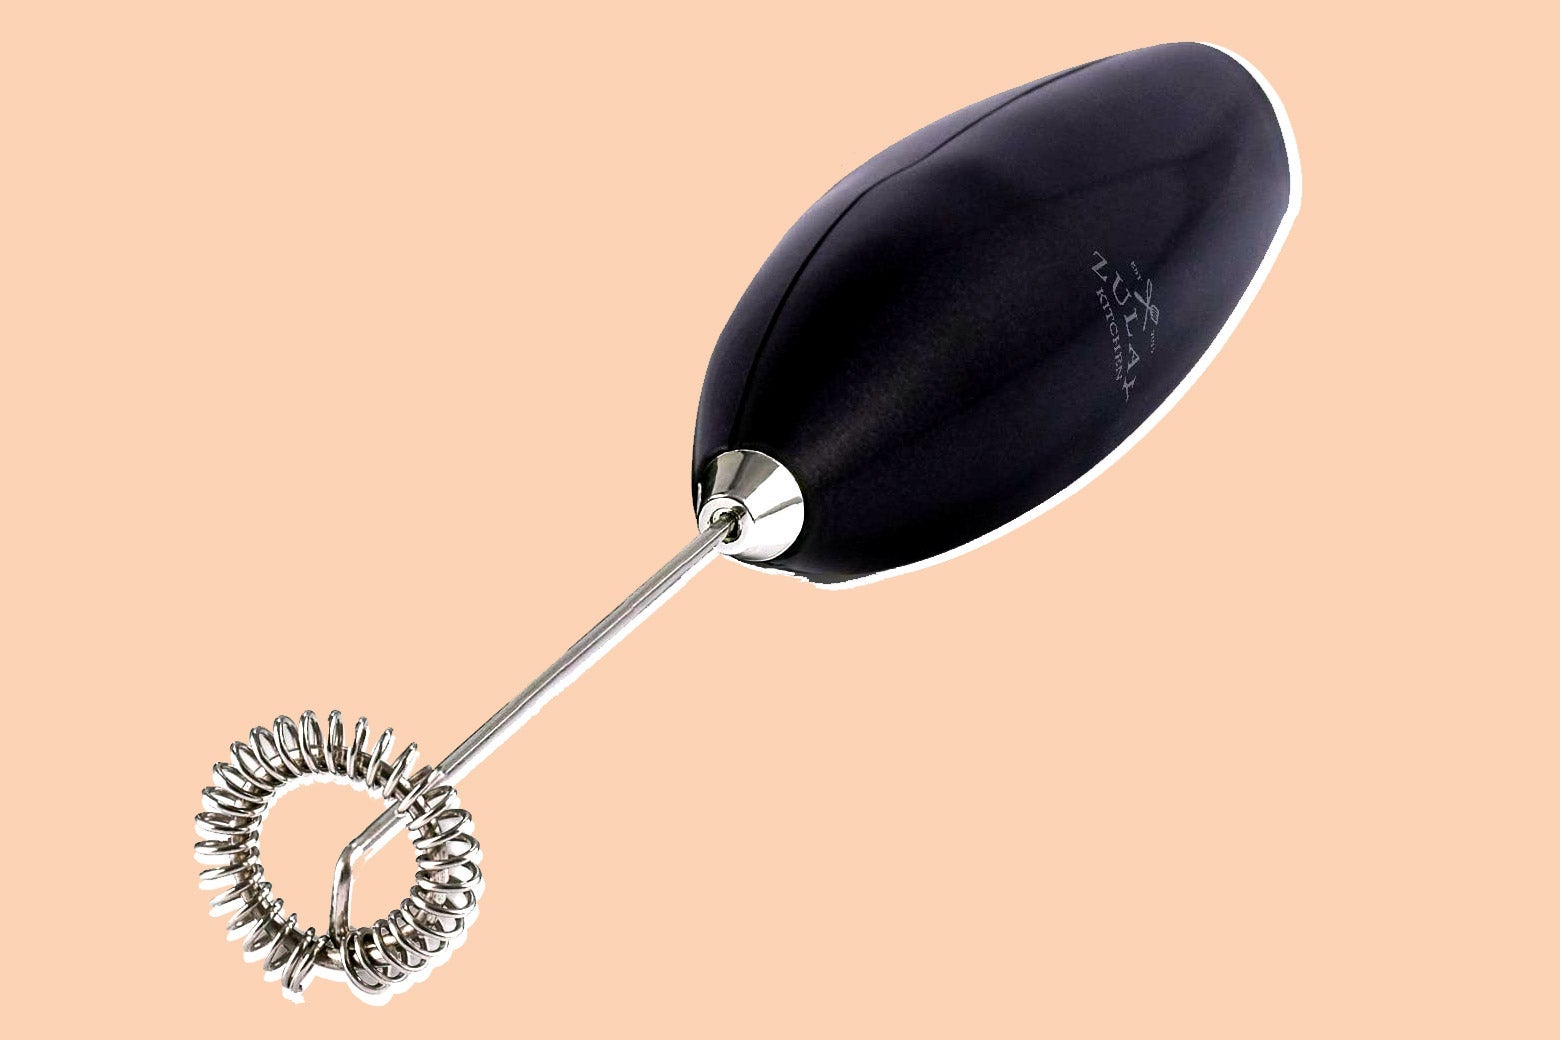 Zulay original milk frother is now on sale.